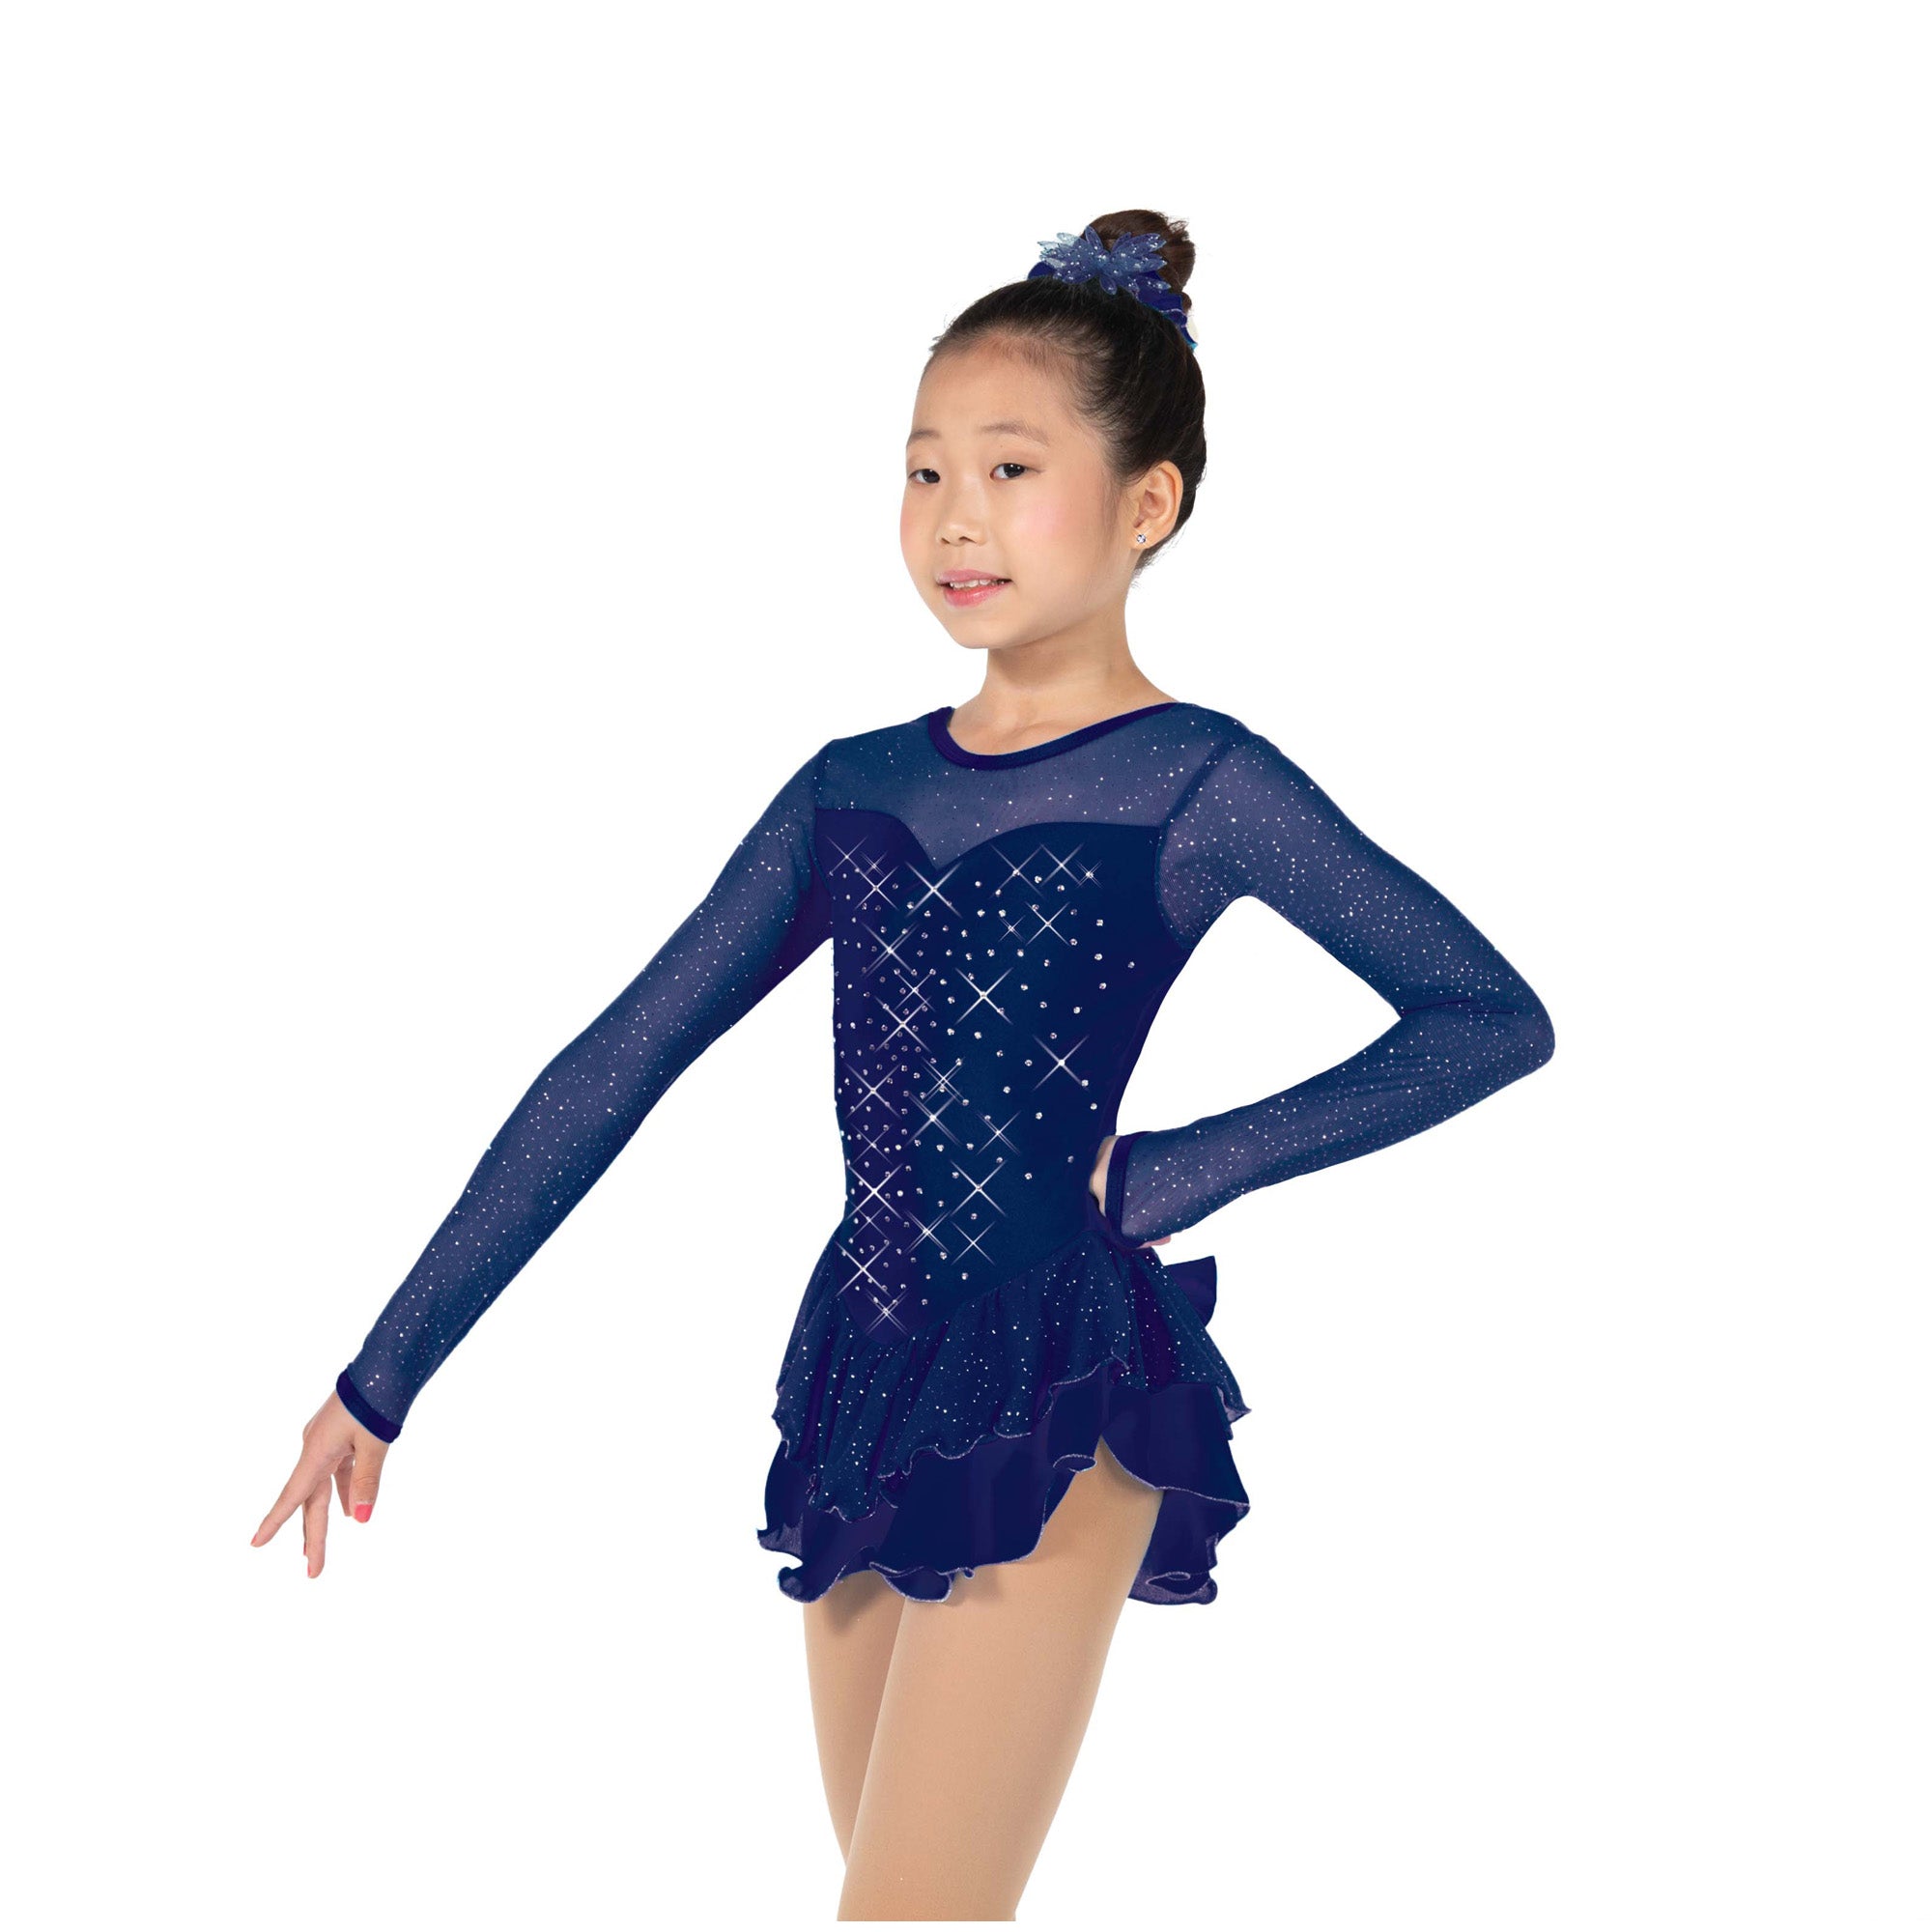 614 Crystal Kisses Skating Dress in Navy Blue by Jerry's